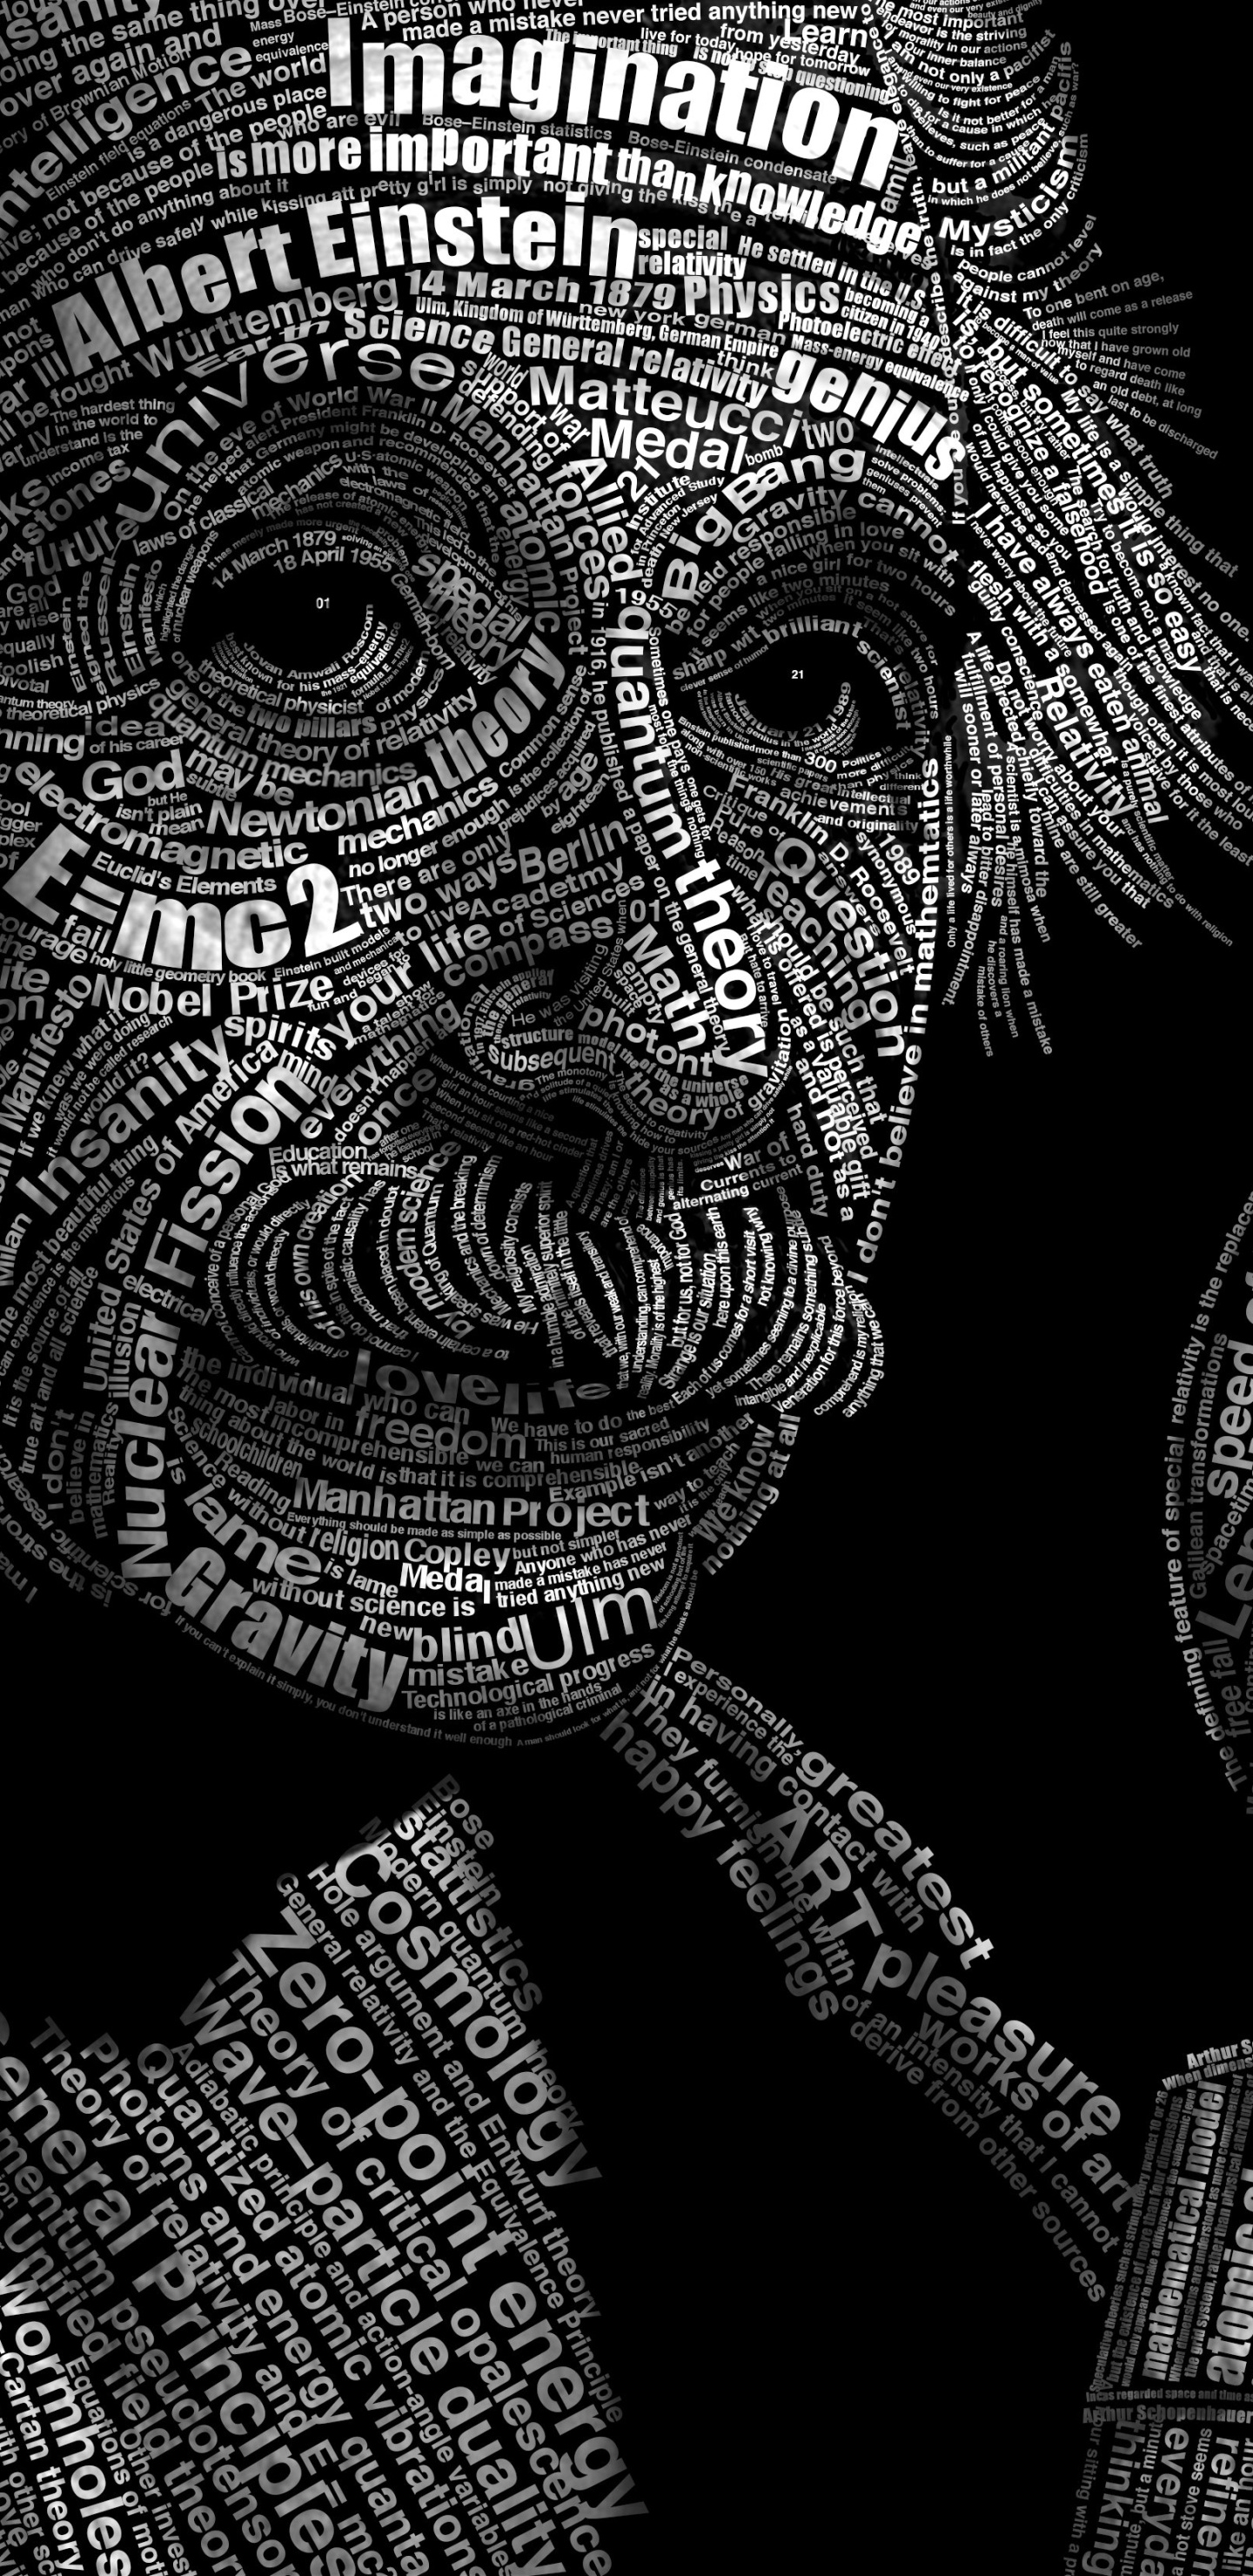 Einstein: One of the greatest and most influential physicists of all time. 1440x2960 HD Wallpaper.